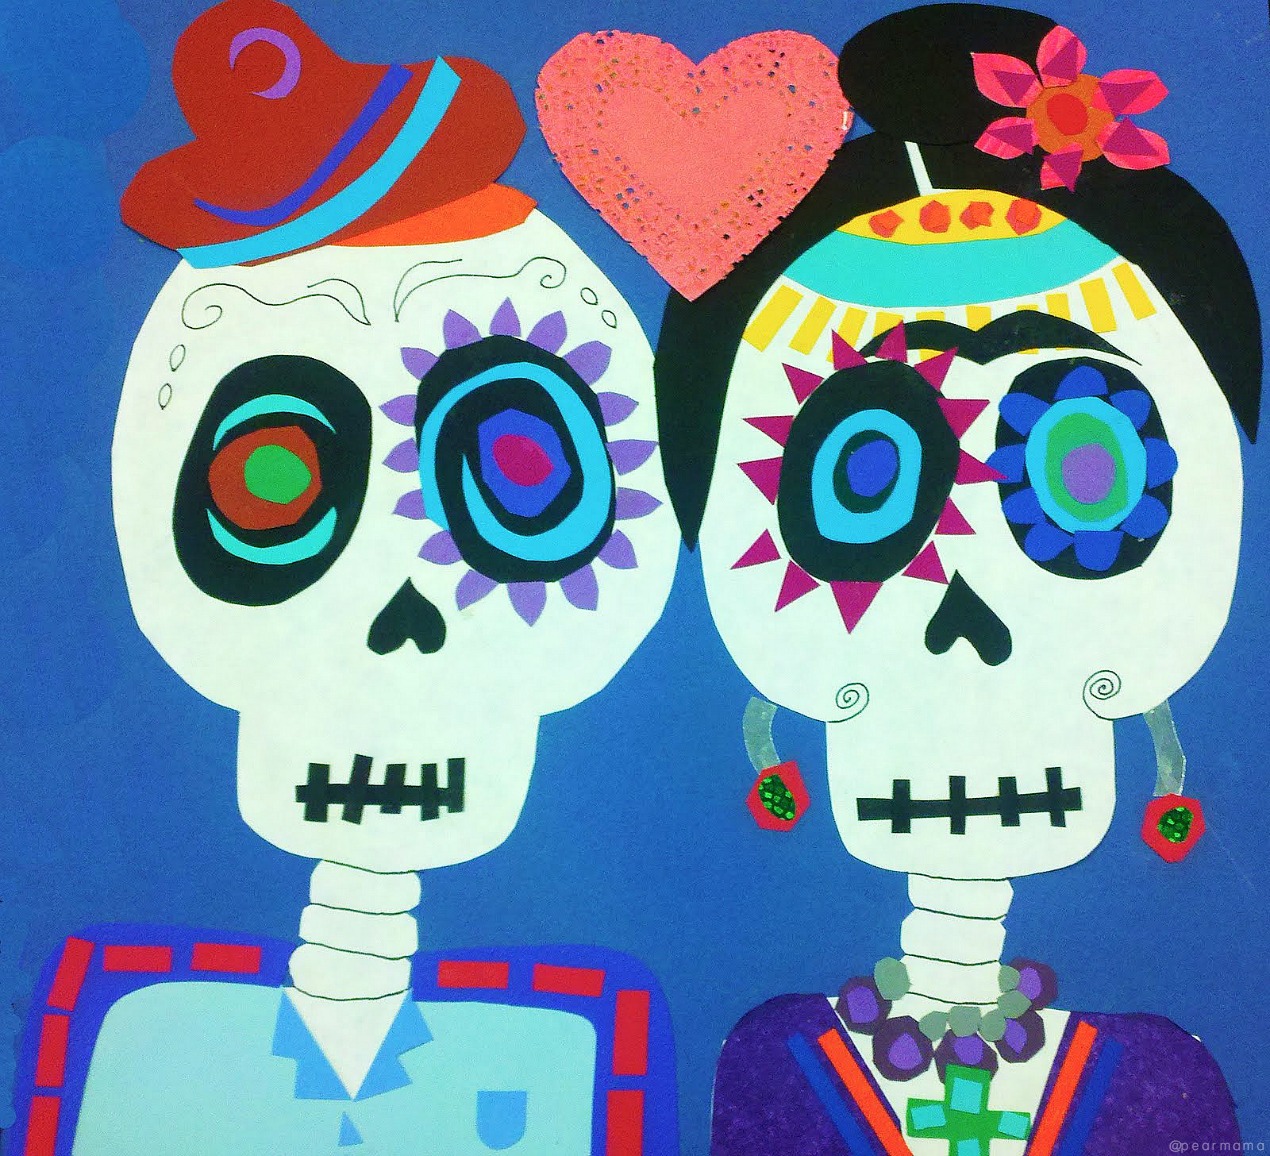 Create your own Frida Kahlo and Diego Rivera paper collage for Dia de los Muertos using colored scrapbook paper, scissors, glue and markers.